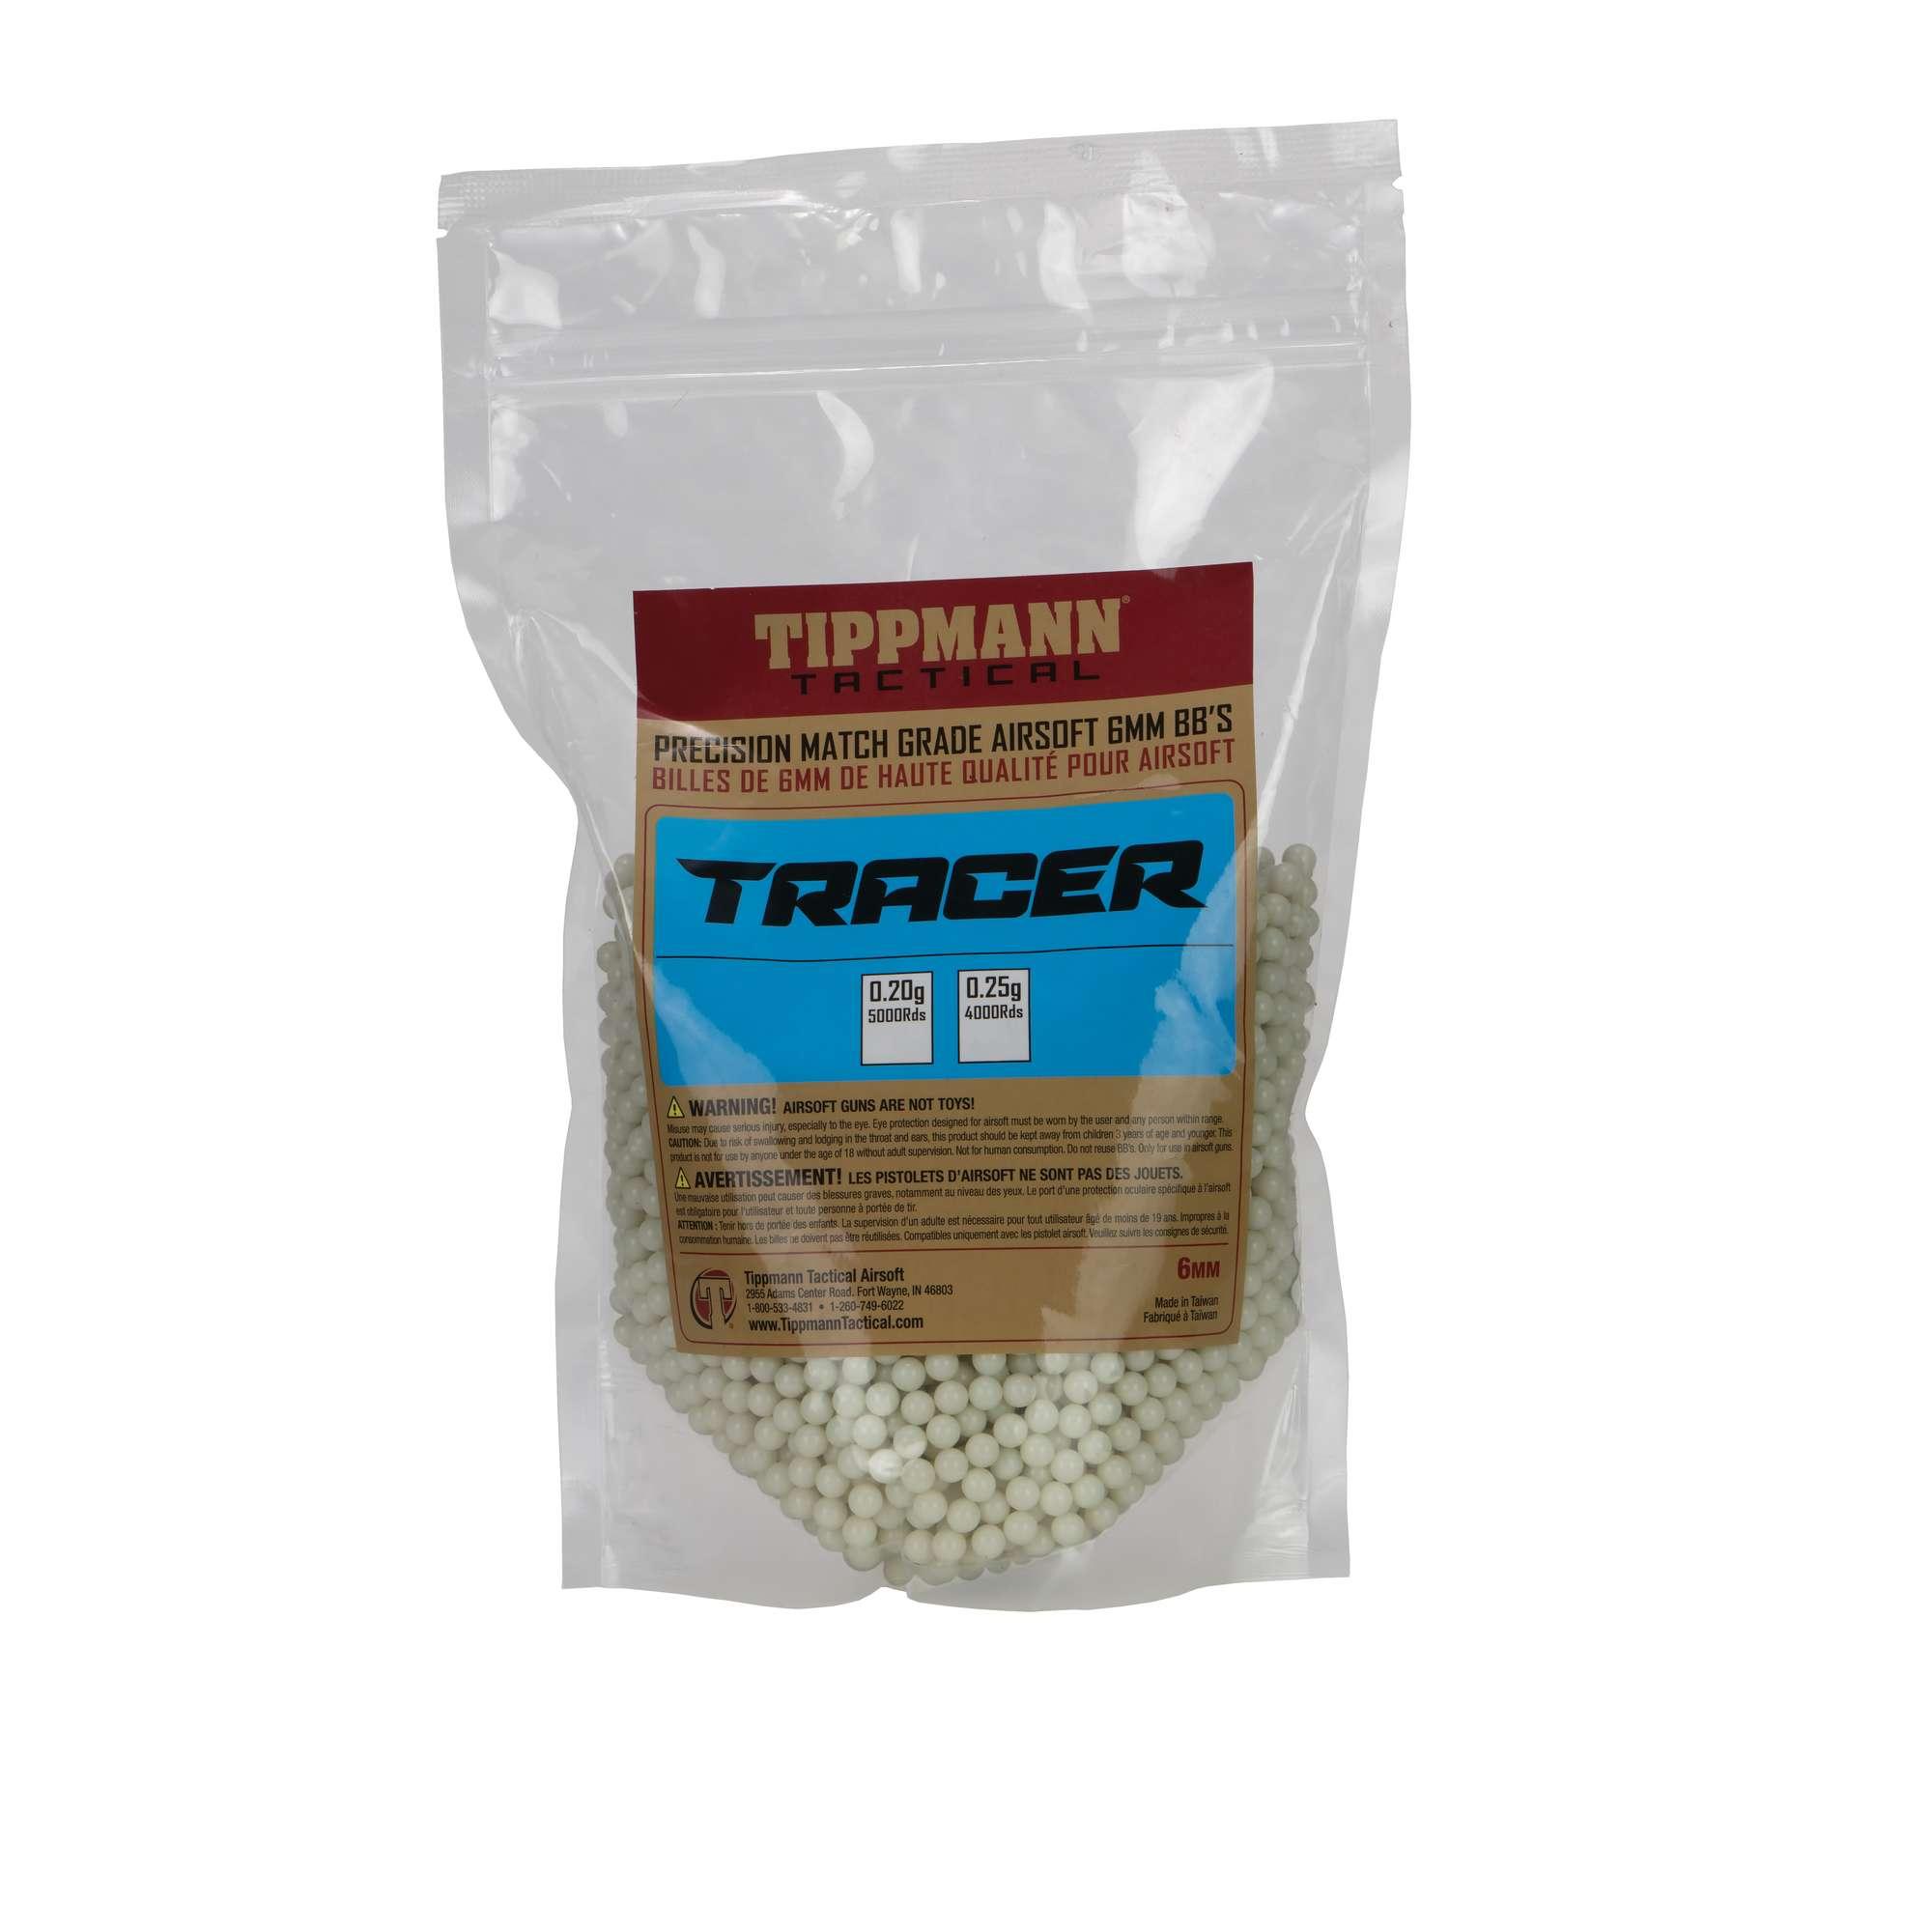 Tippmann Tactical Tracer Airsoft Ammo 25g 4K Glow, 6mm